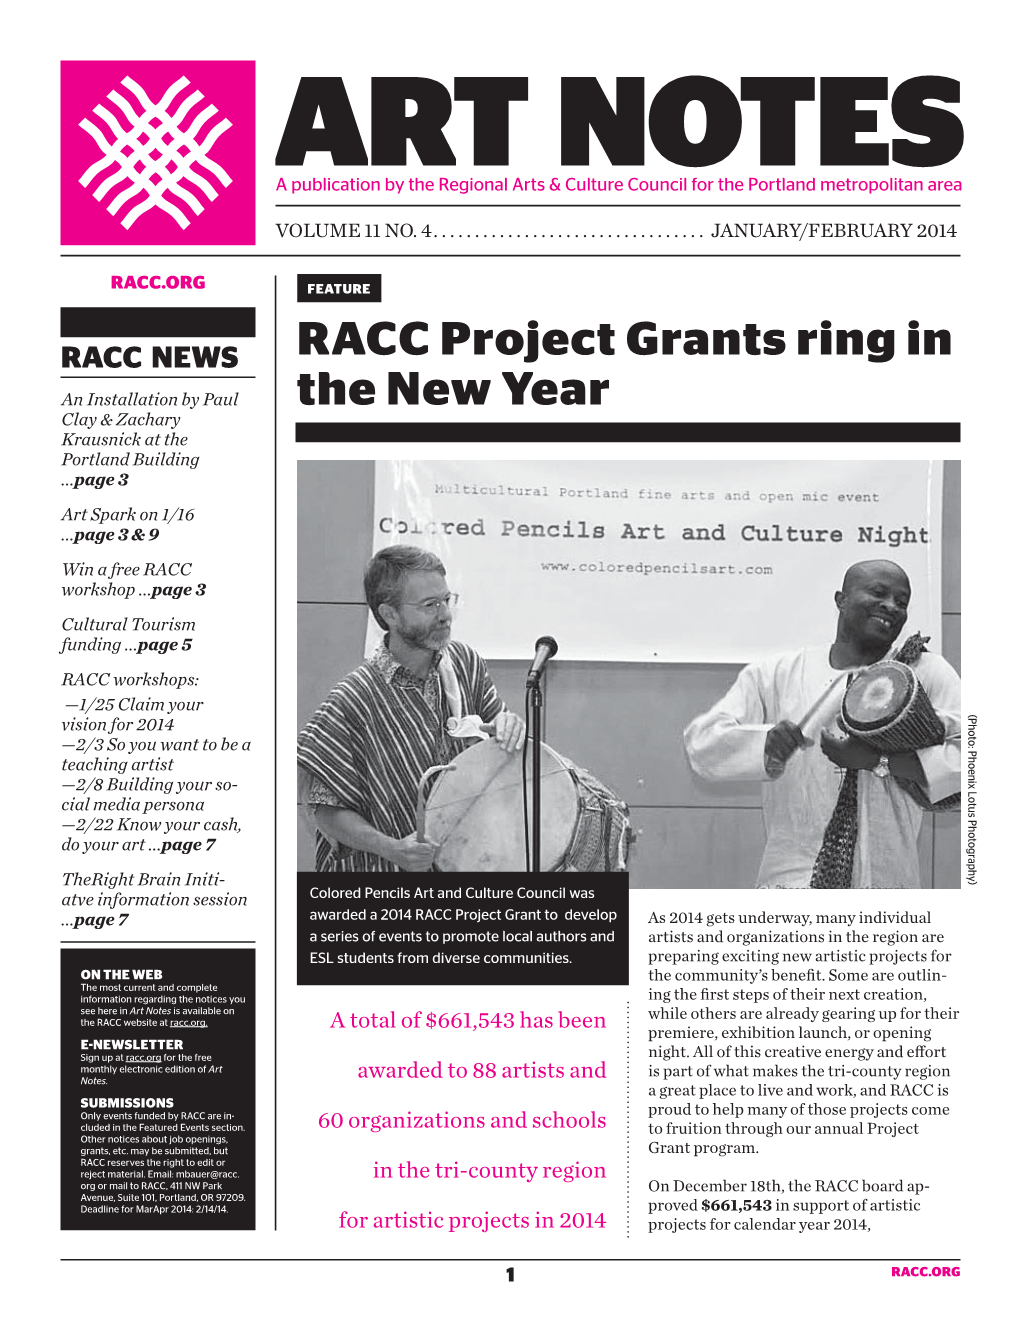 RACC Project Grants Ring in the New Year